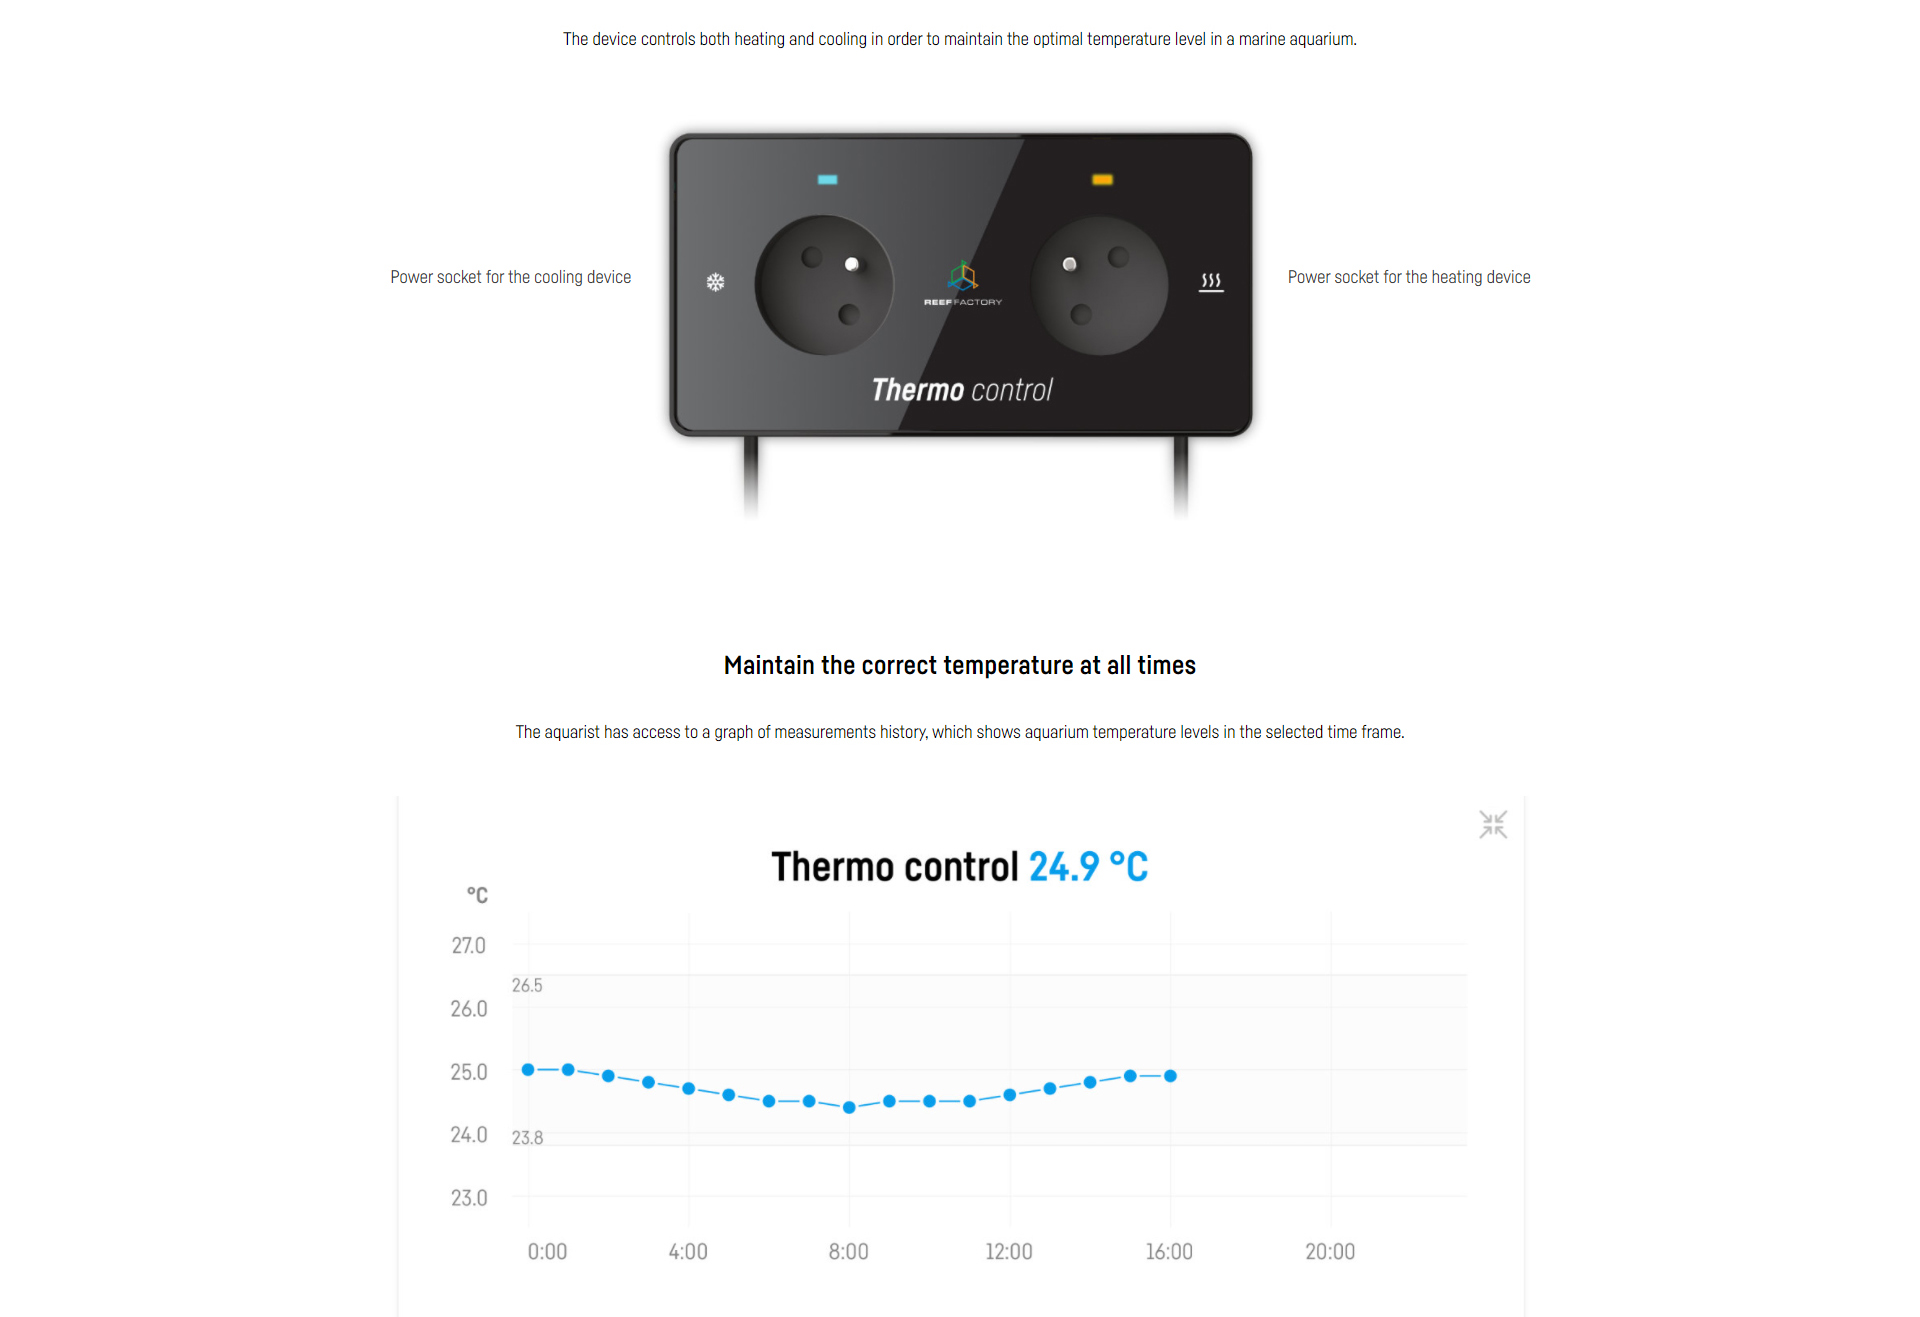 Thermo Control12